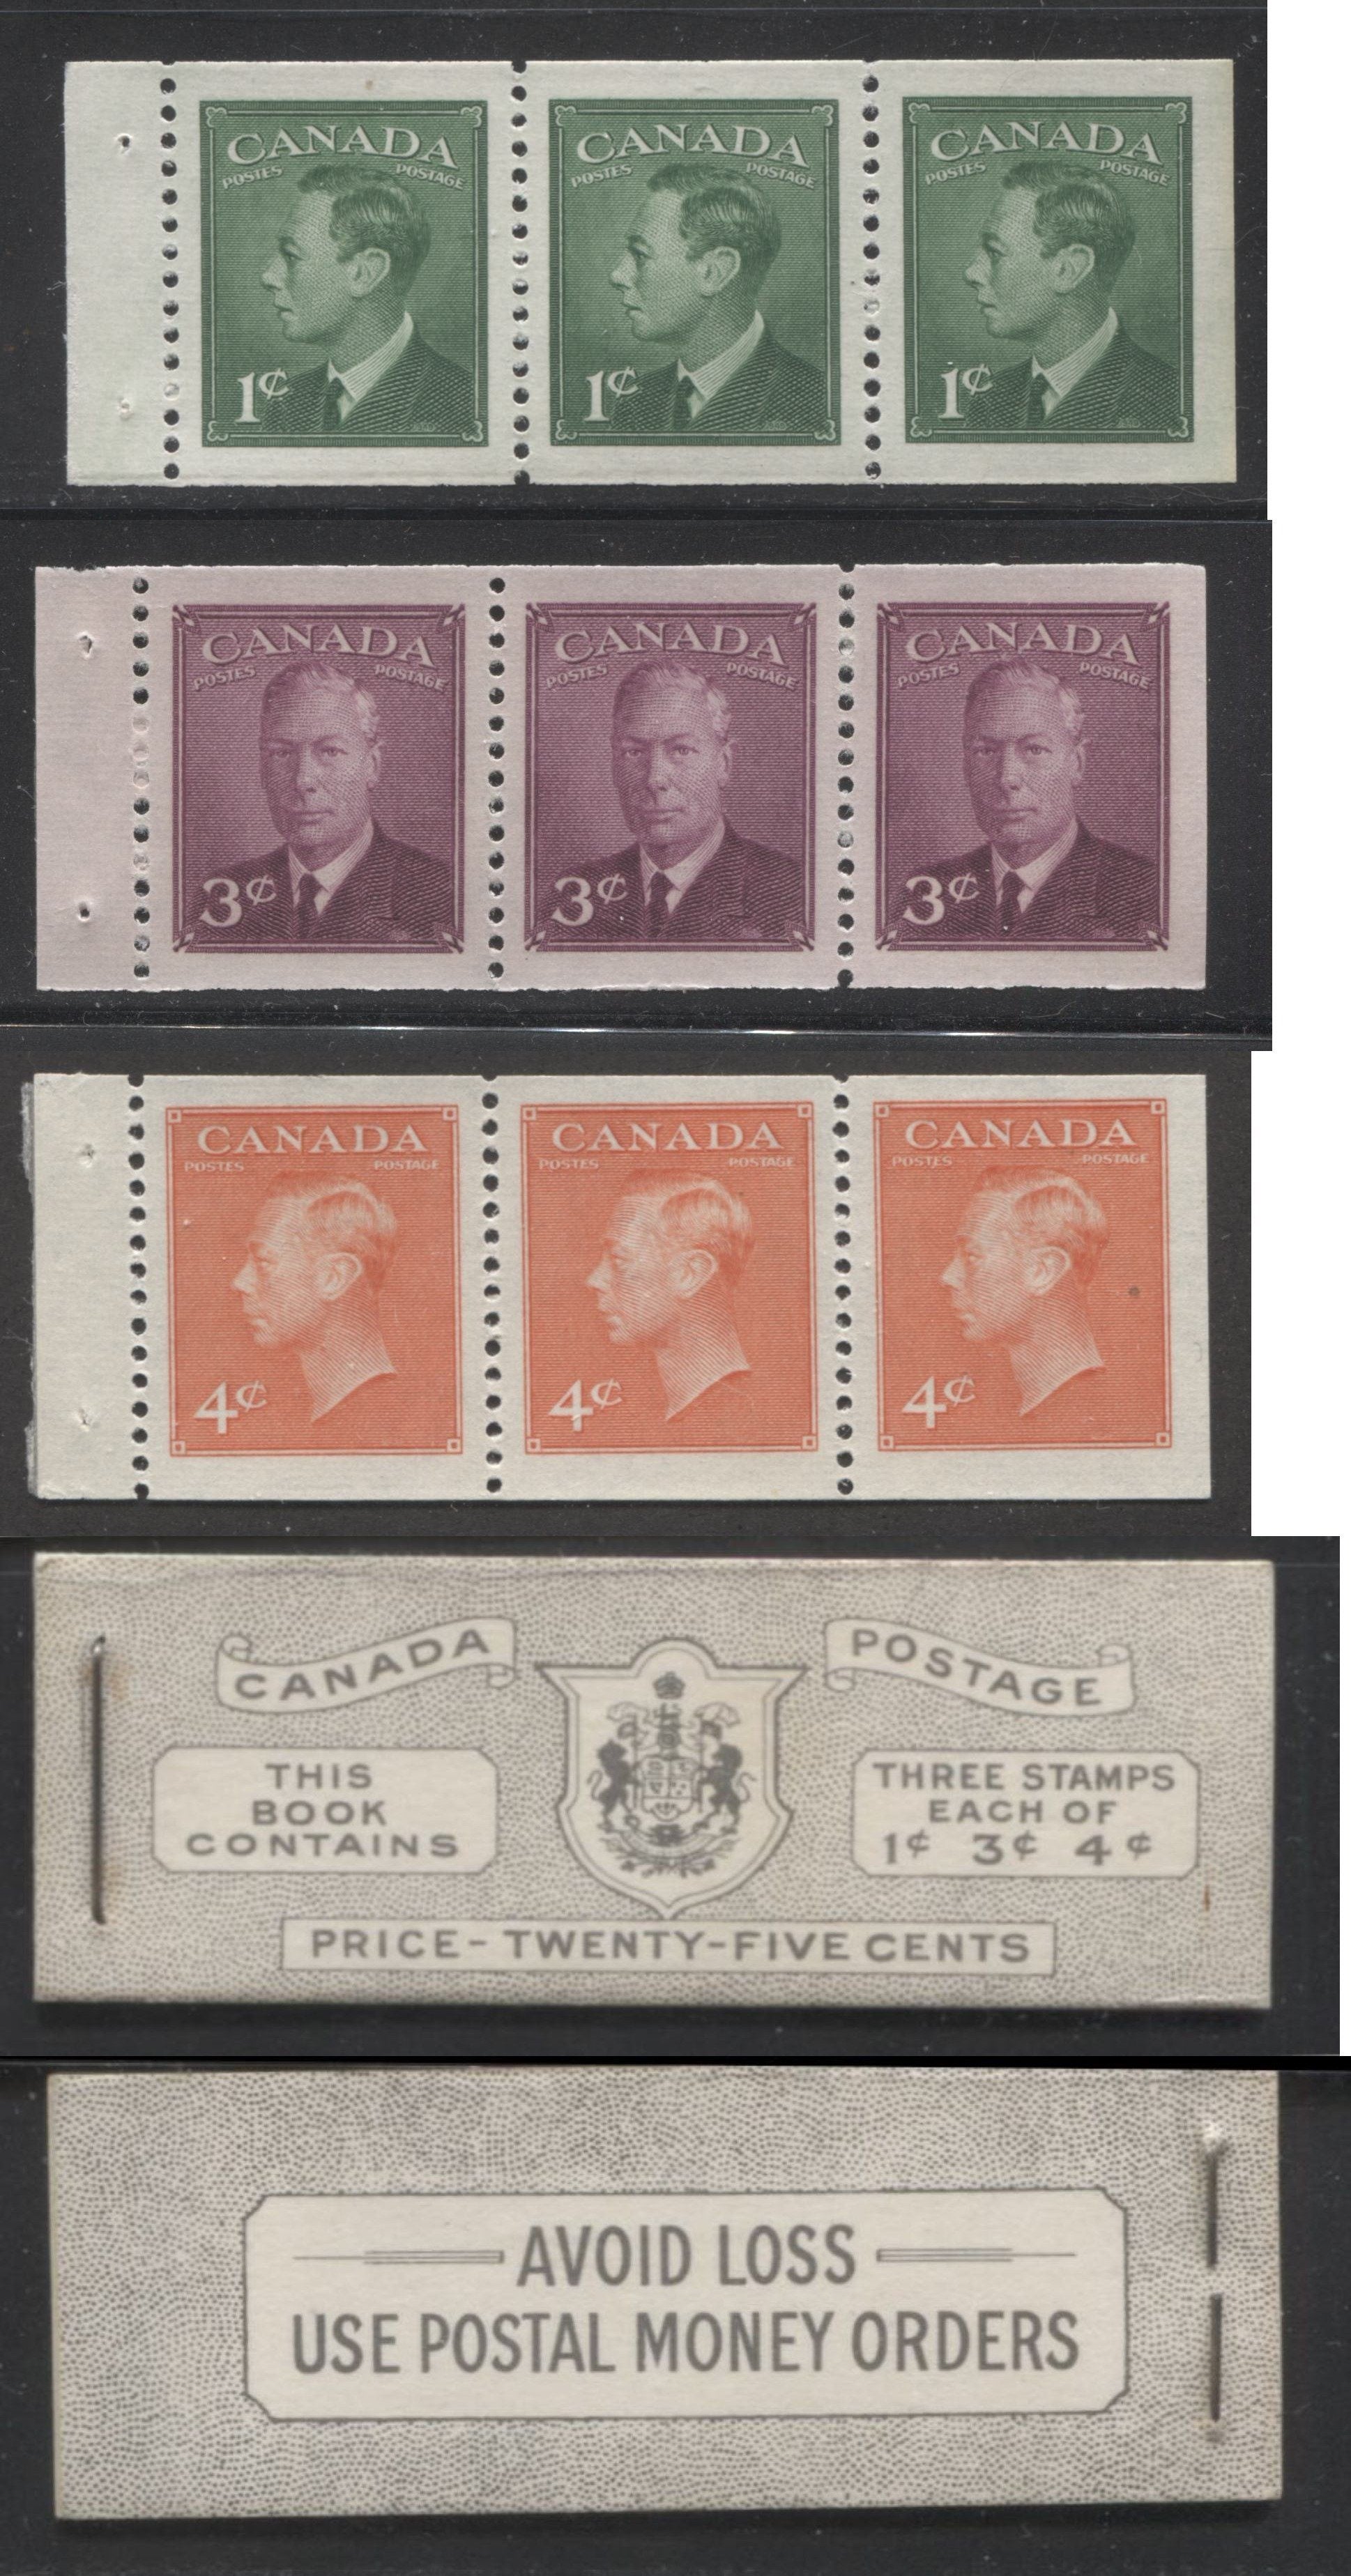 Canada #BK44 1949-1953 Postes-Postage Issue Complete 25c, English Booklet Containing 1 Pane of 3 of Each of the 1c Green, 3c Rose Purple and 4c Orange King George VI Harris Front Cover Type IVb , Back Cover Ii Brixton Chrome 